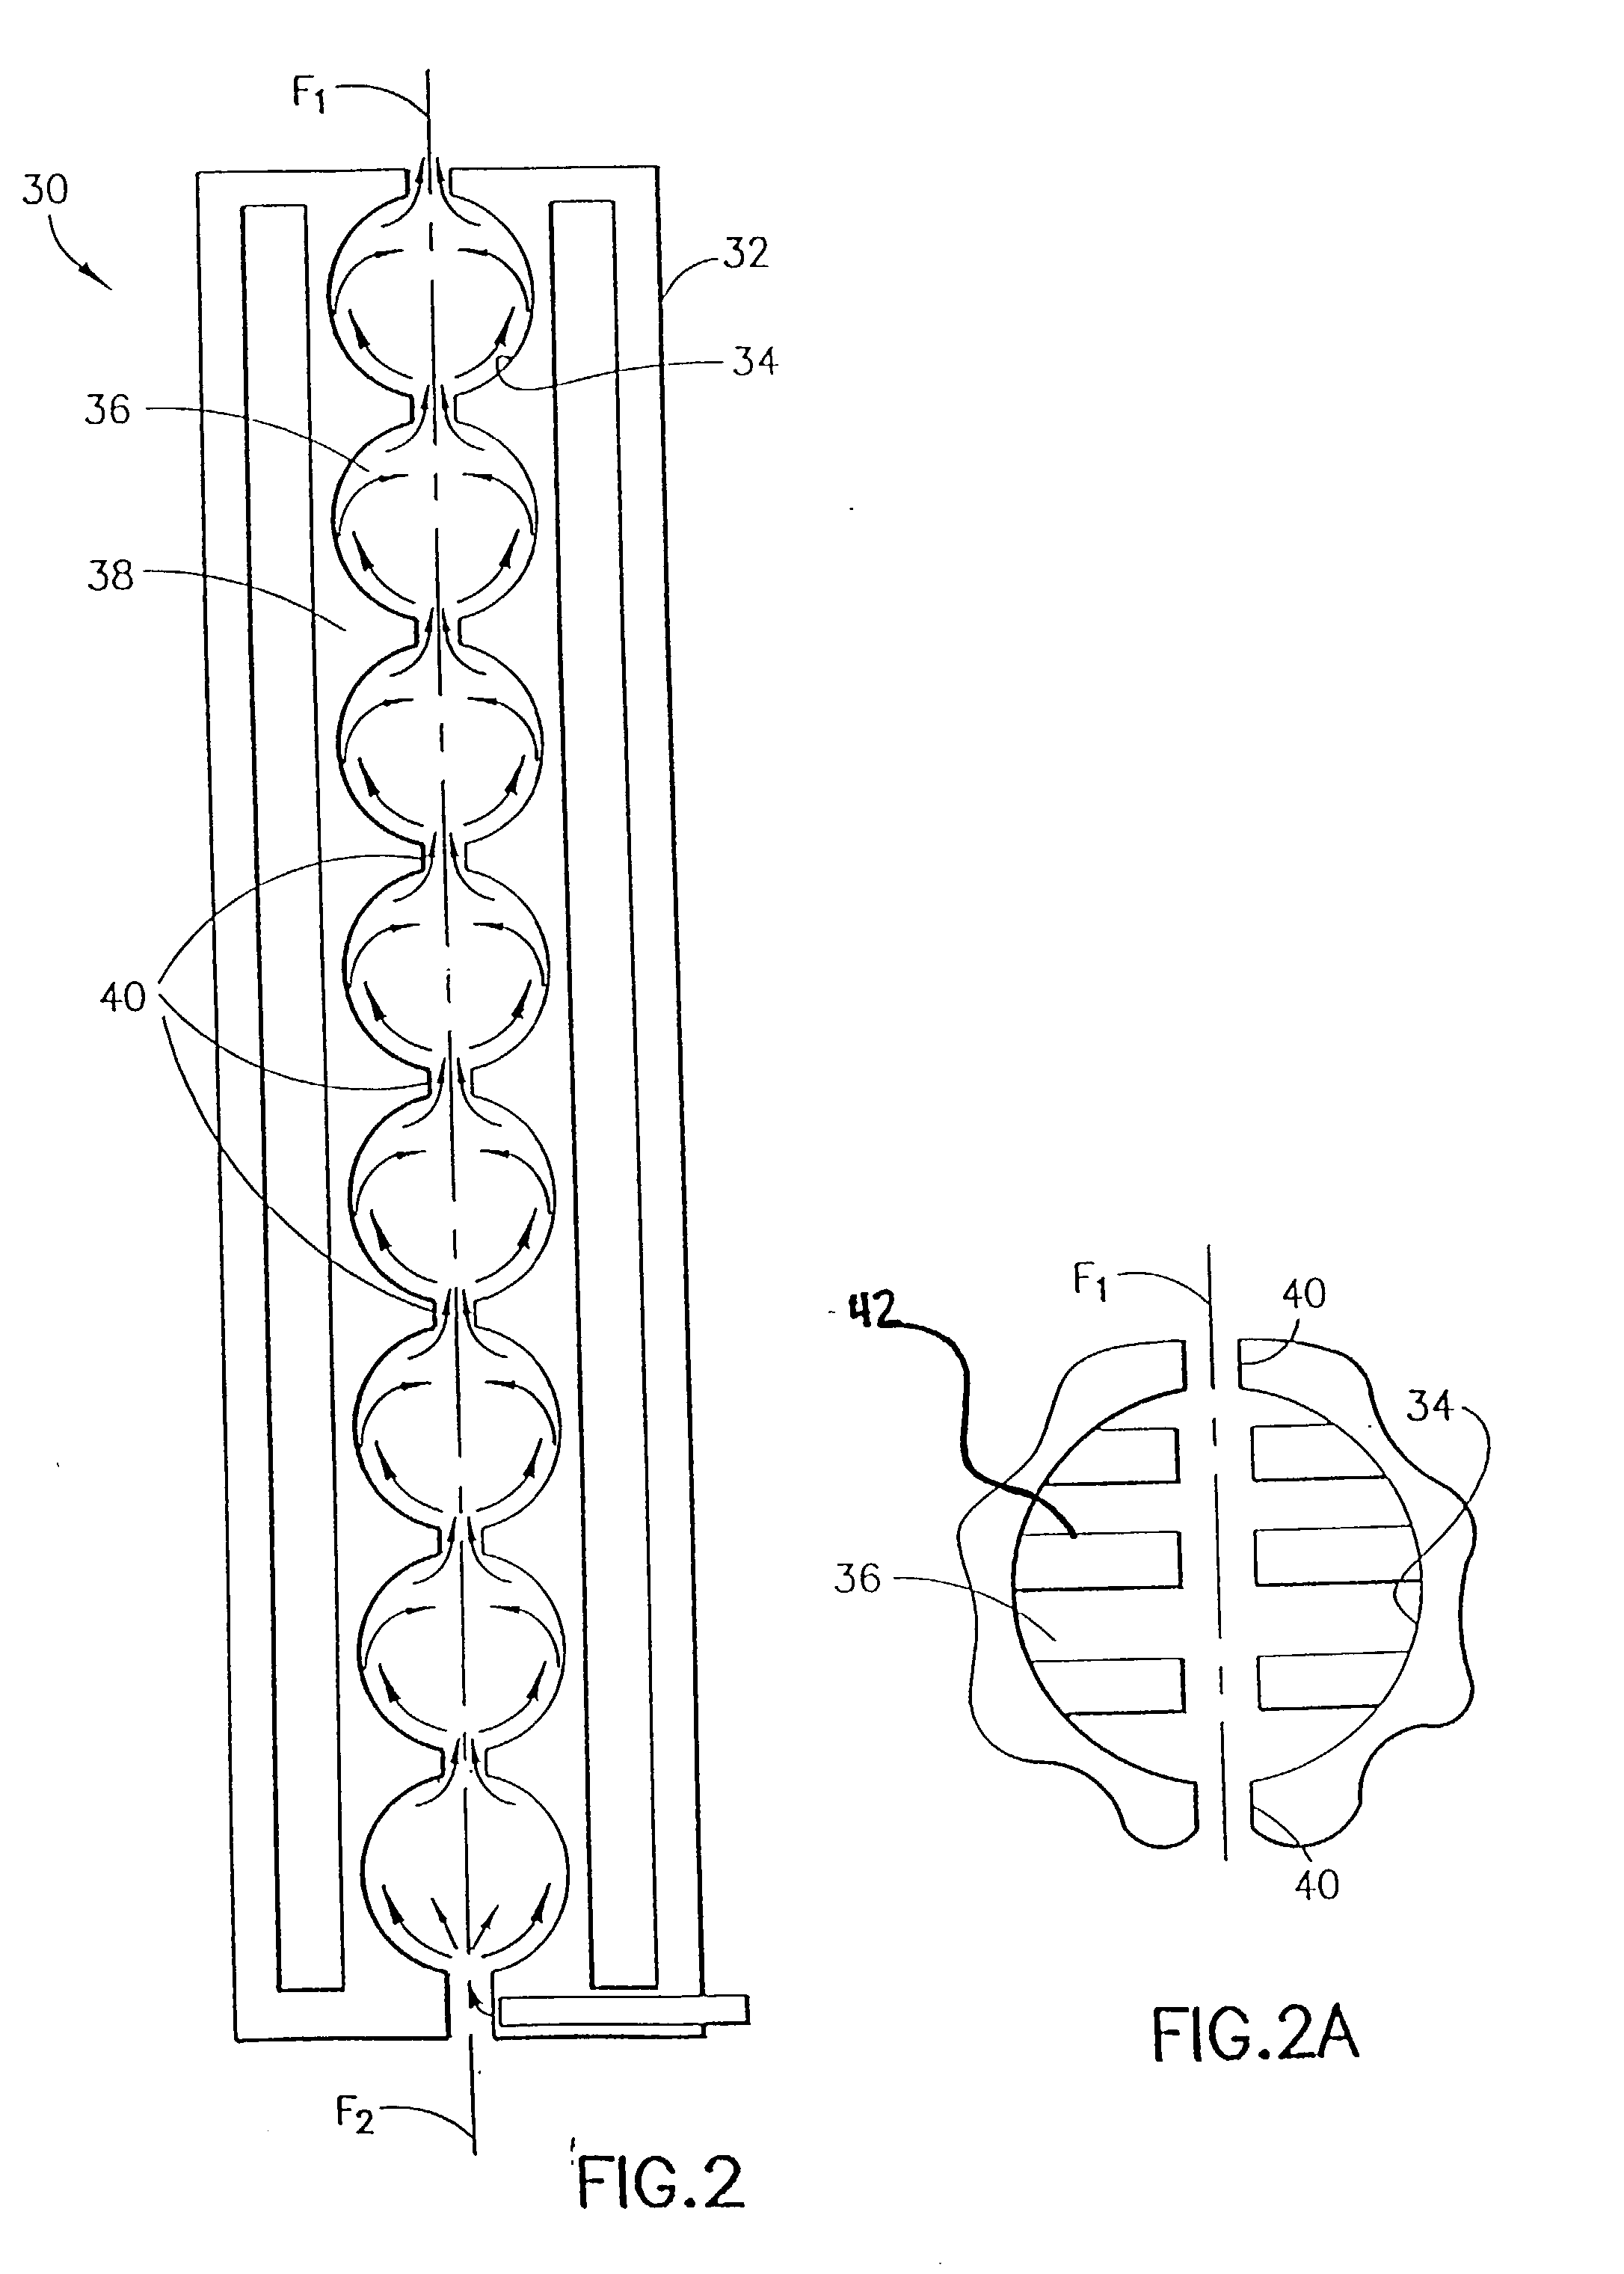 Method and apparatus for curing a fiber having at least two fiber coating curing stages